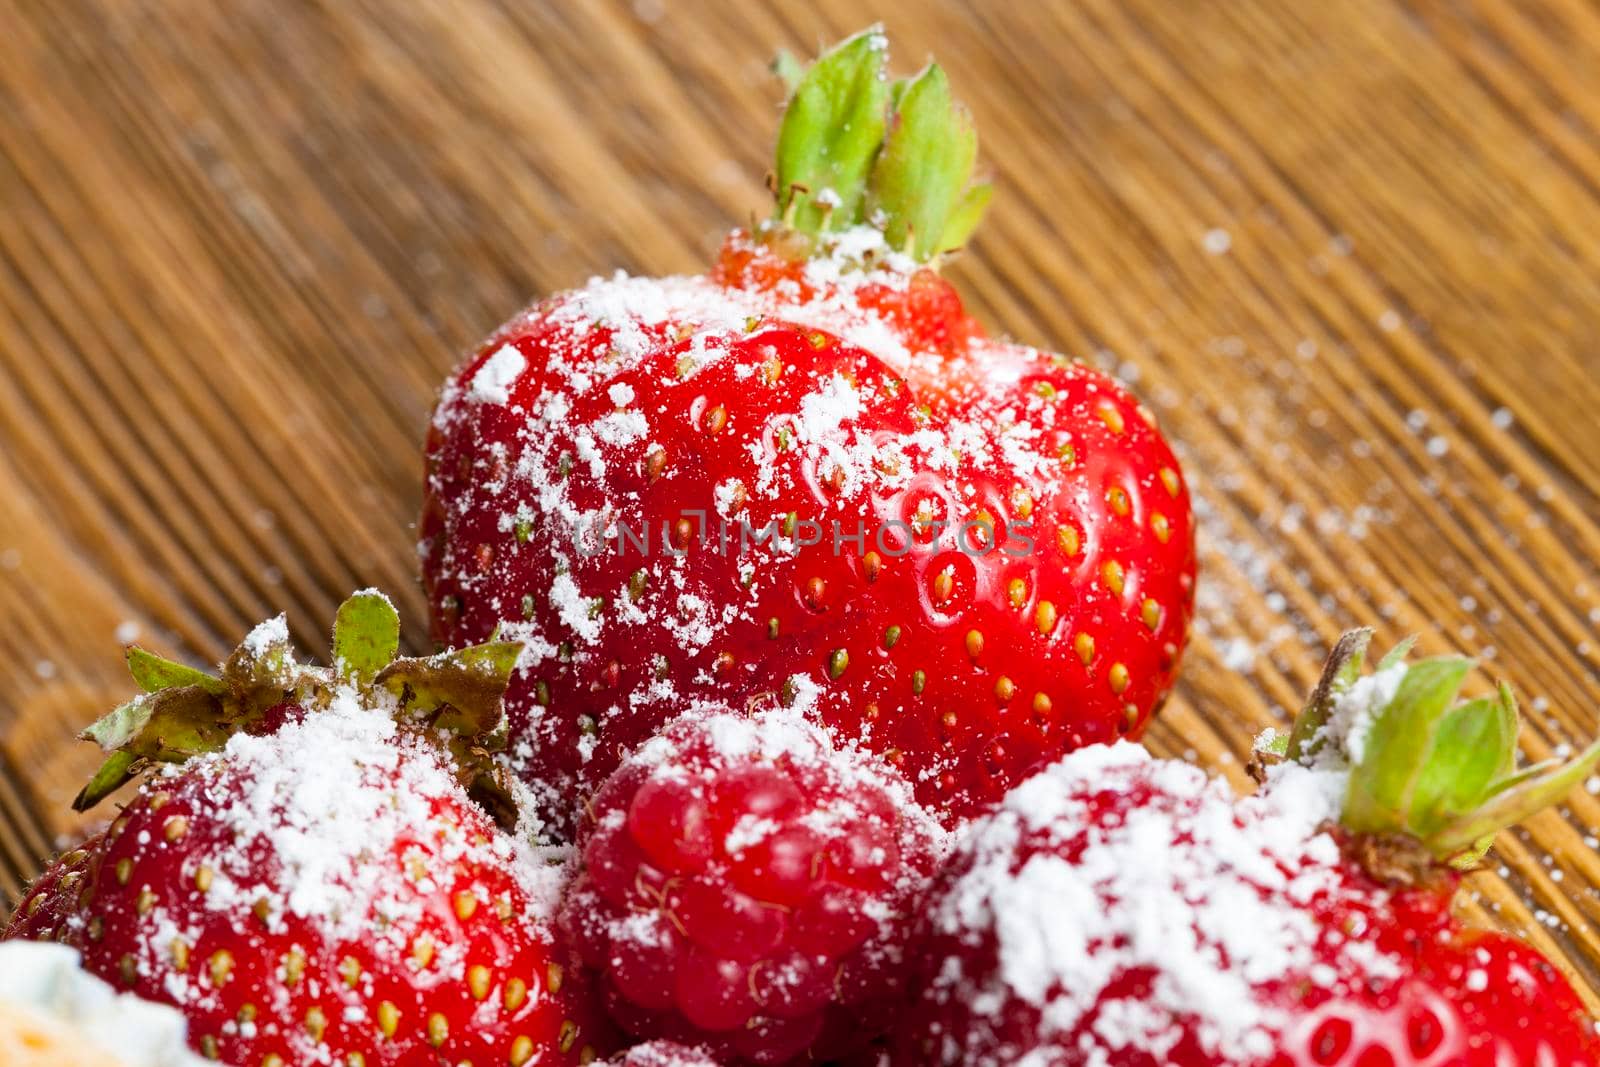 sprinkled with powdered sugar ripe red strawberry berries, lying on a wooden table while cooking